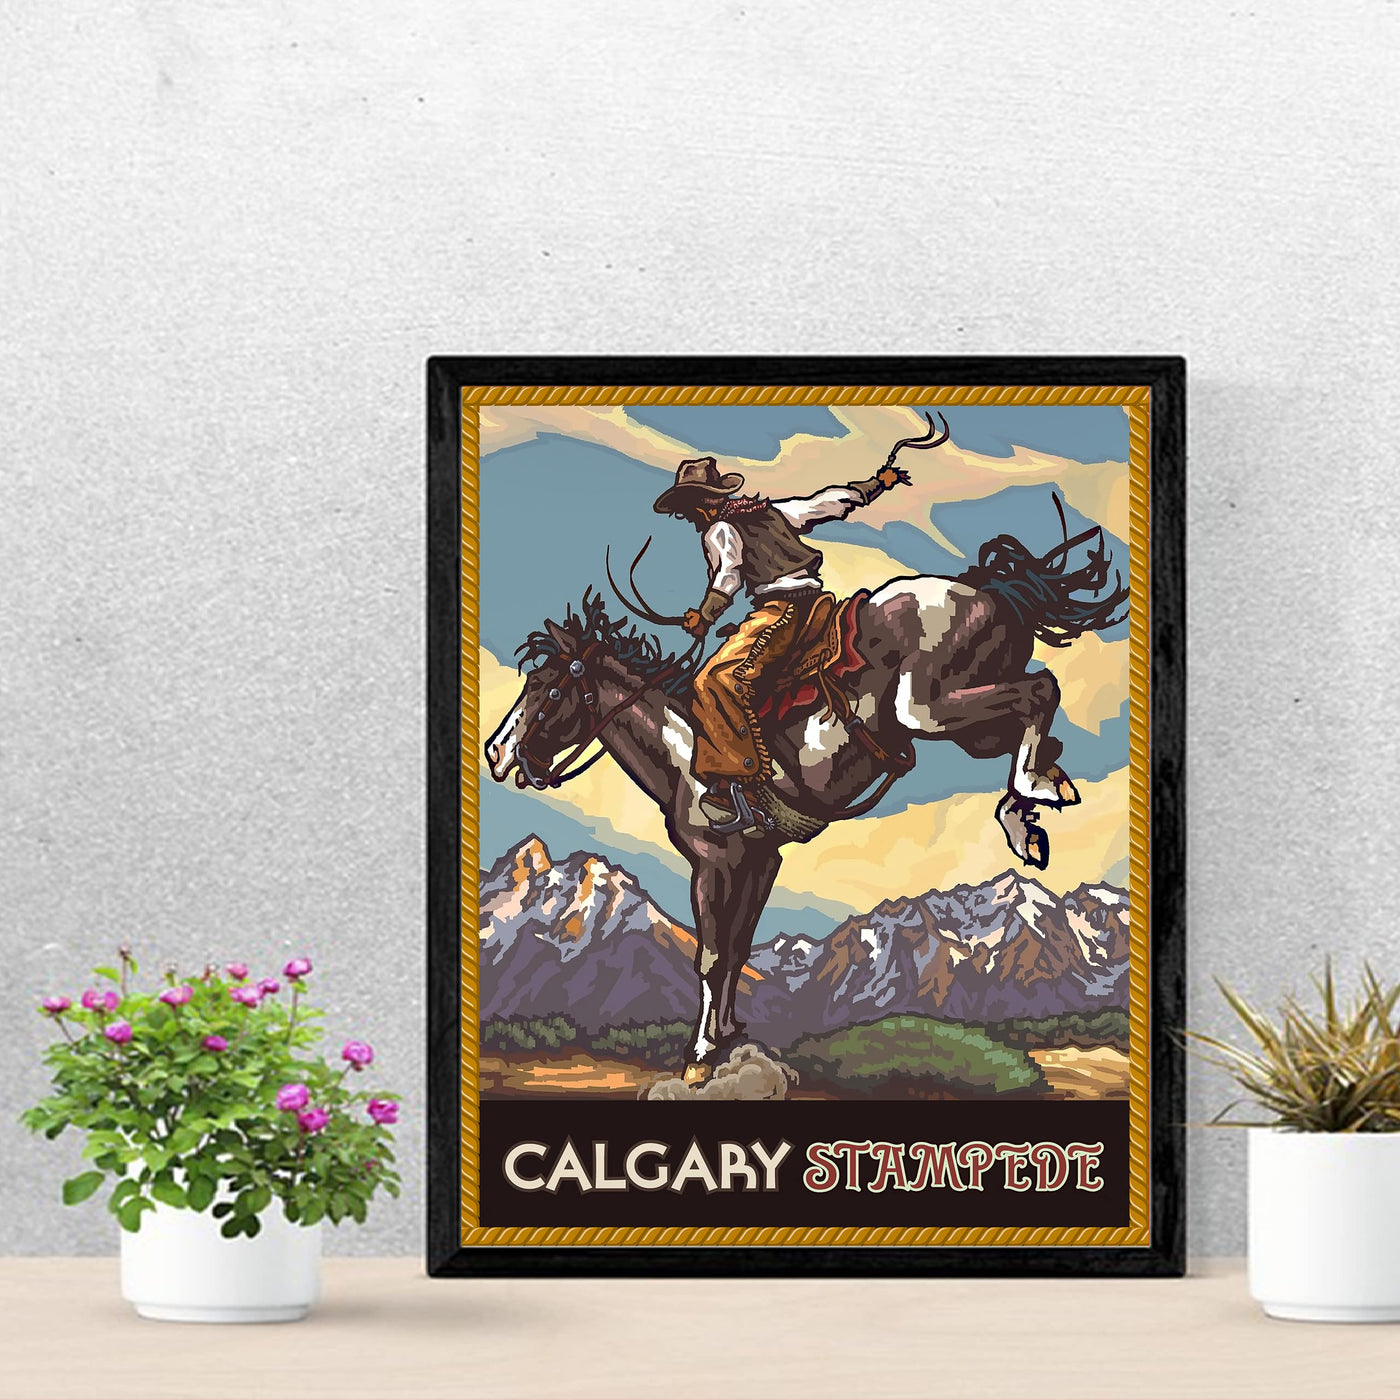 "Calgary Stampede" Cowboy Riding Horse Wall Art Sign -8 x 10" Country Rustic Rodeo Poster Print -Ready to Frame. Home-Office-Farmhouse Decor. Perfect Gift for All Cowboys & Cowgirls!